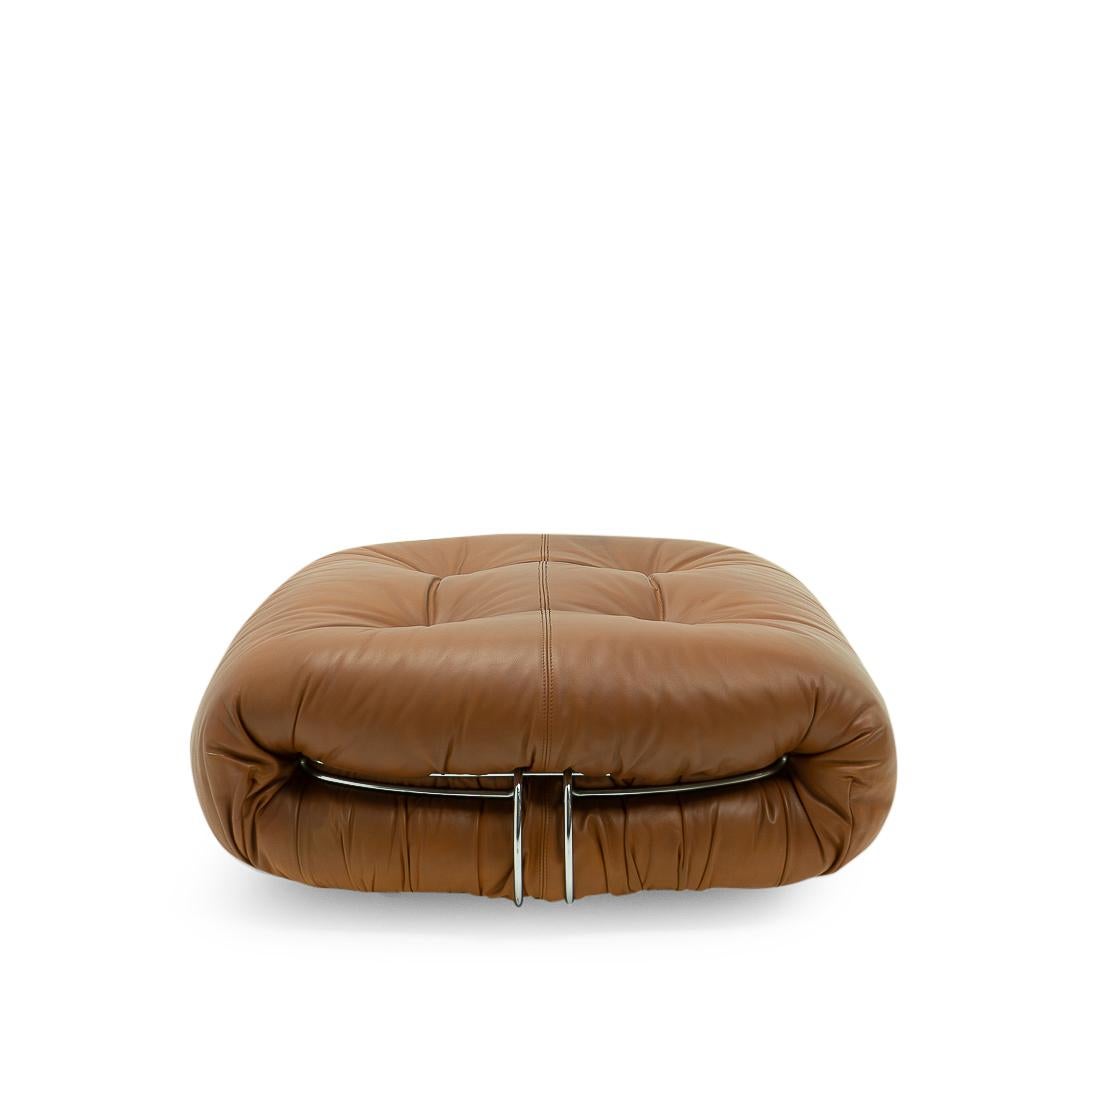 Soriana pouf or ottoman by Afra and Tobia Scarpa for Cassina. Original 1970s cognac leather. The pouf can be easily moved around since it has castors attached to the underside.

Origination: Italy, 1970s. Cassina paper label

Materials: Leather,